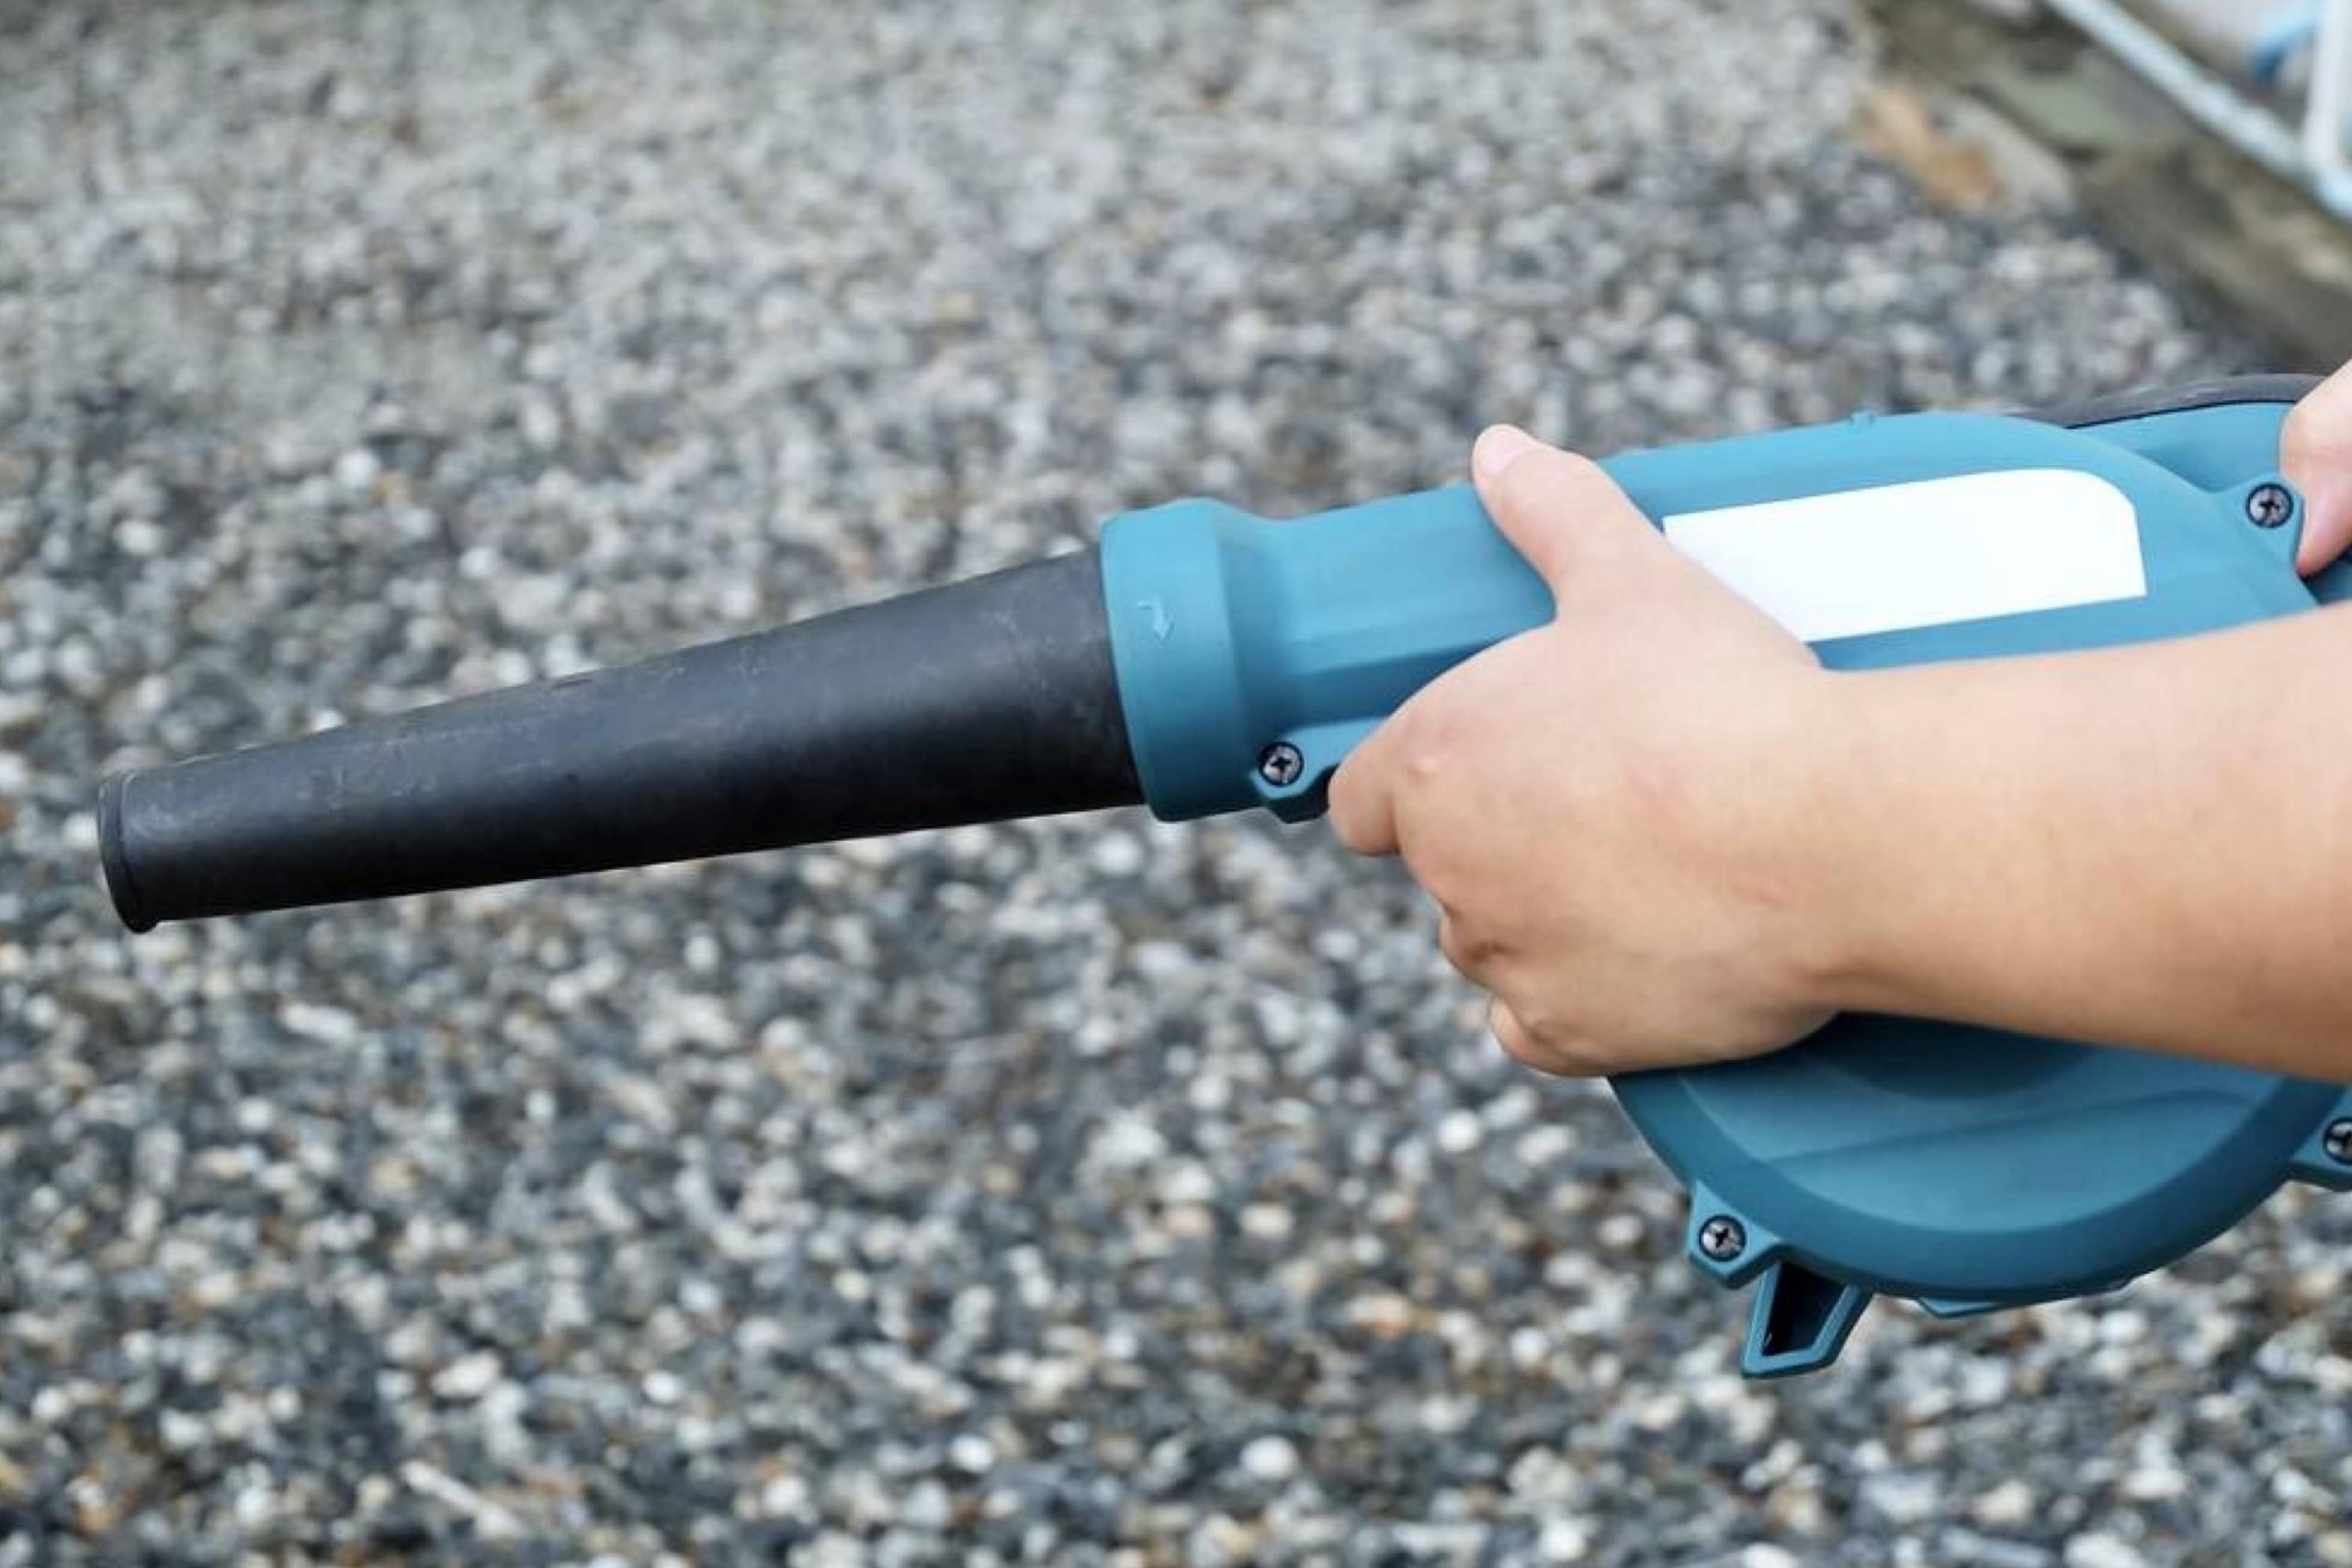 How to Use Your Leaf Blower?